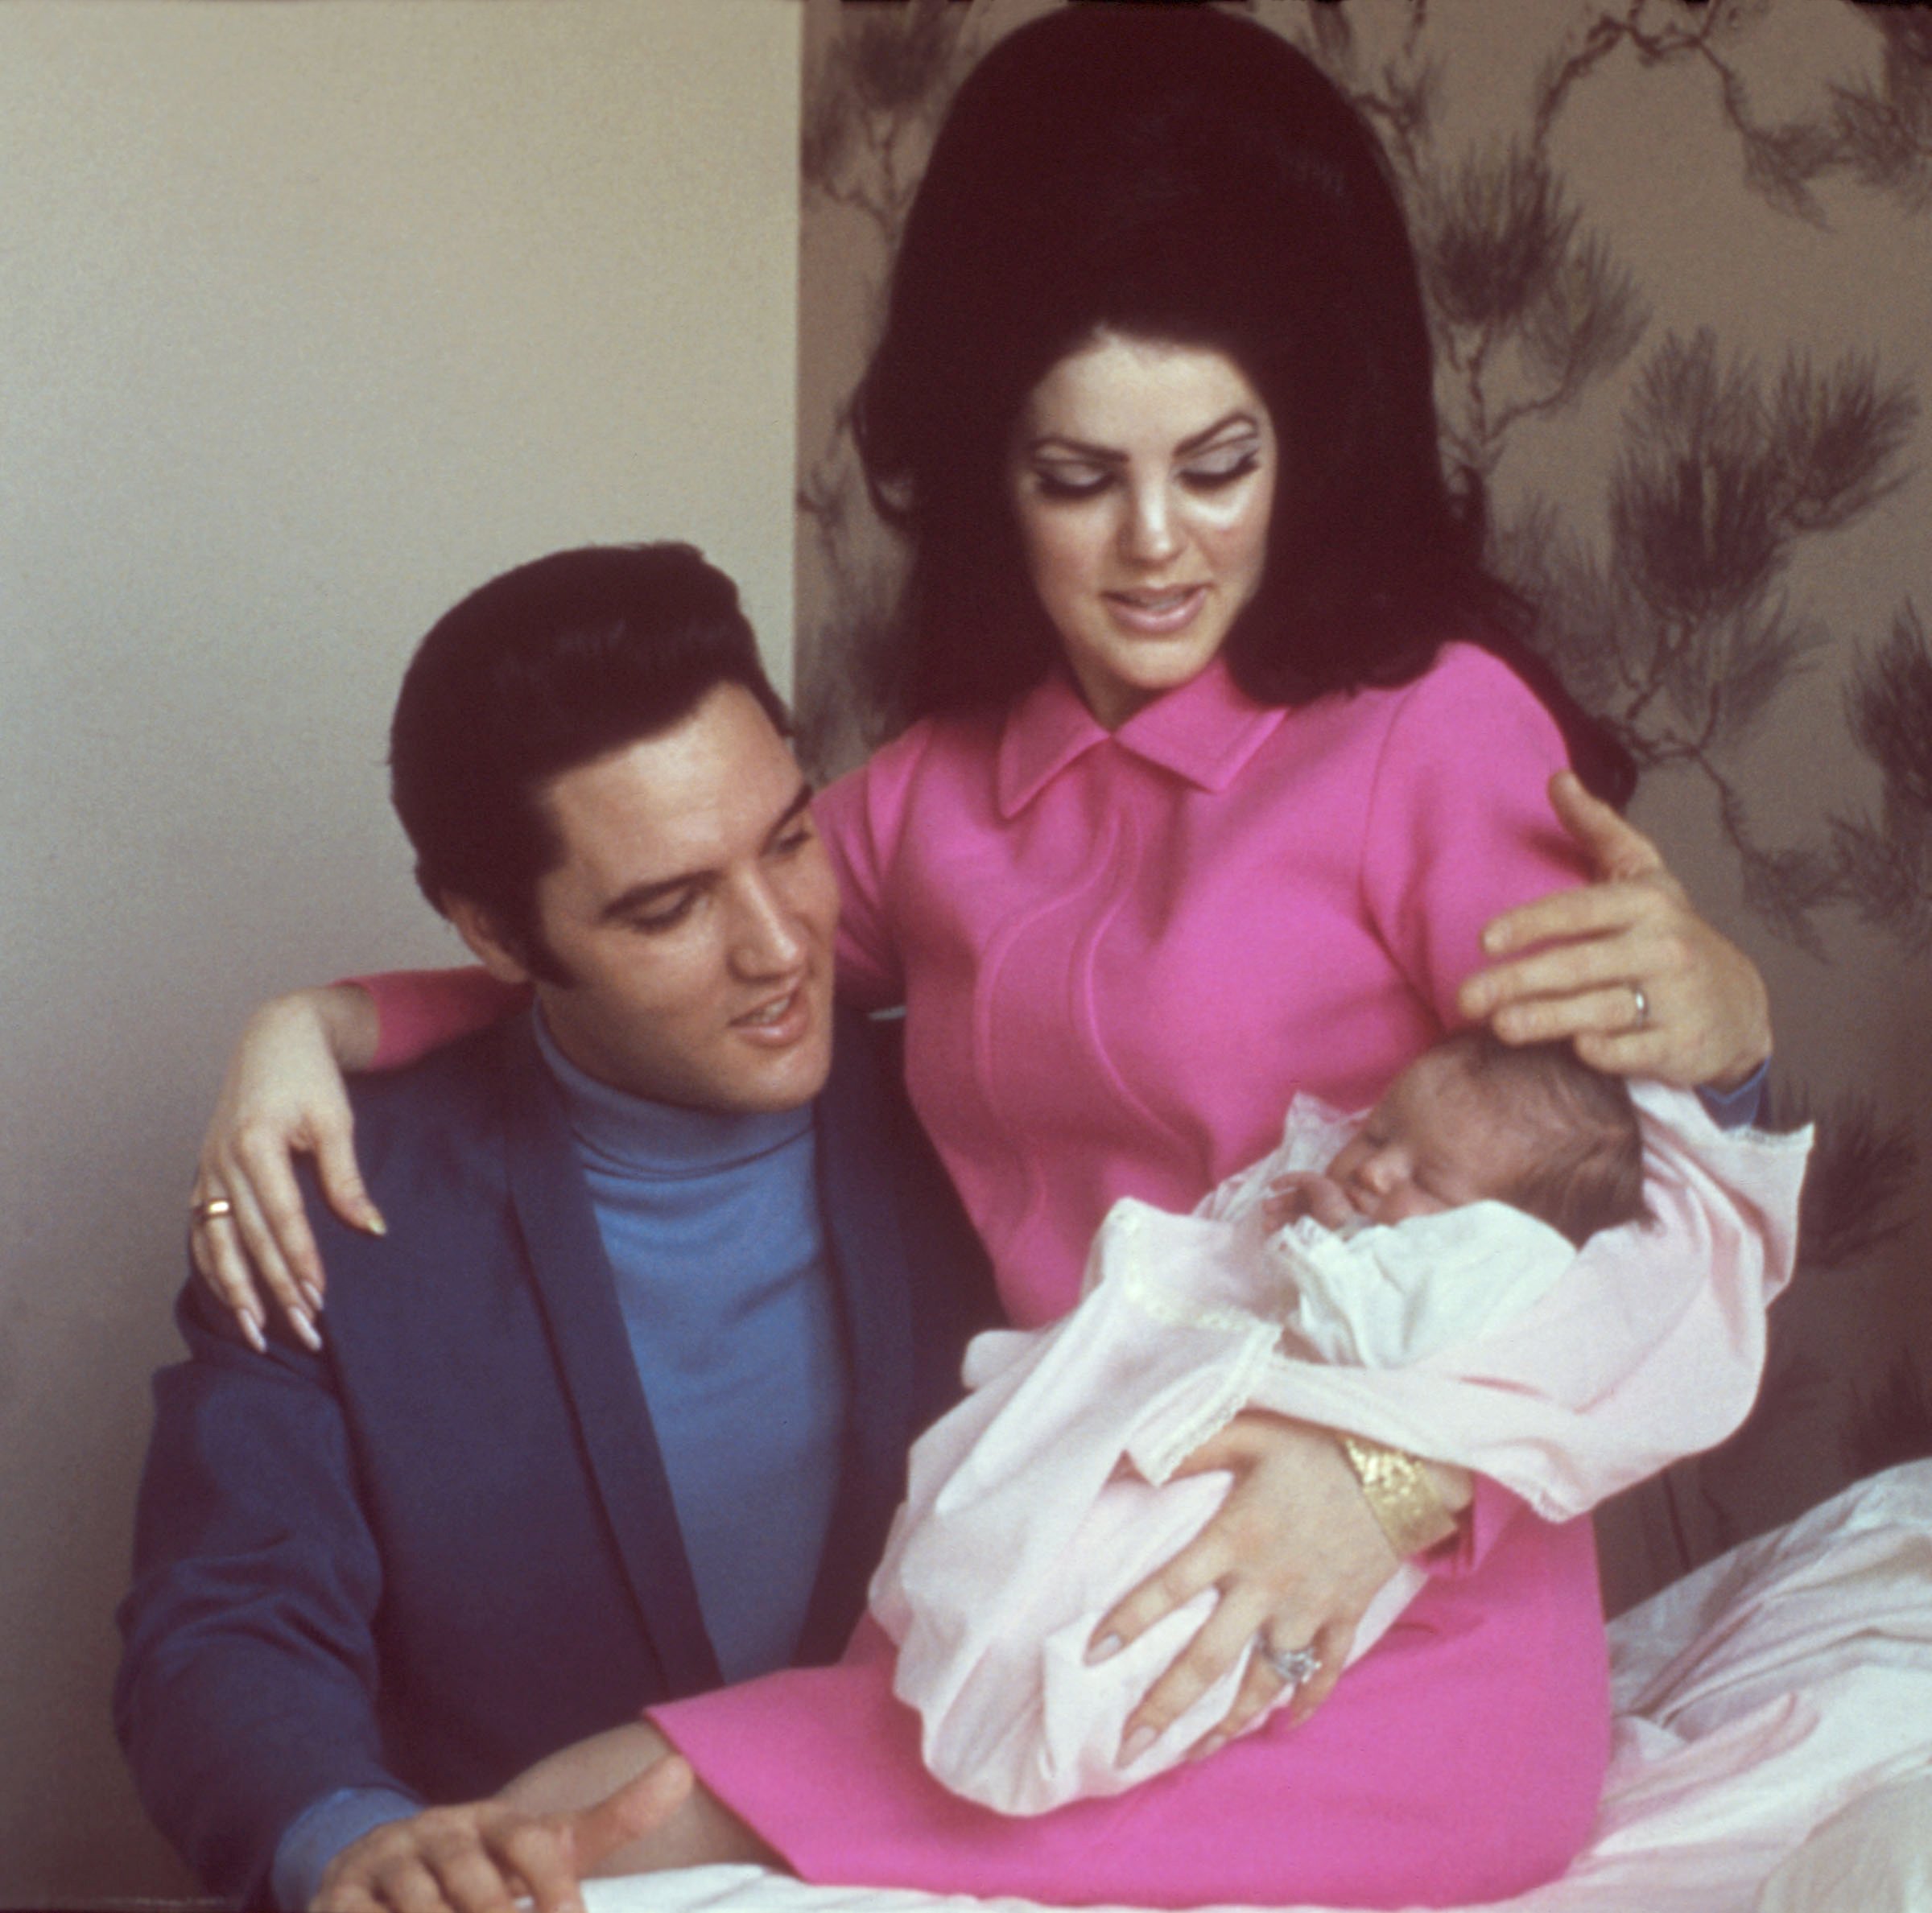 Rock and roll singer Elvis Presley with his wife Priscilla Beaulieu Presley and their 4 day old daughter Lisa Marie Presley on February 5, 1968 in Memphis, Tennessee. | Source: Getty Images